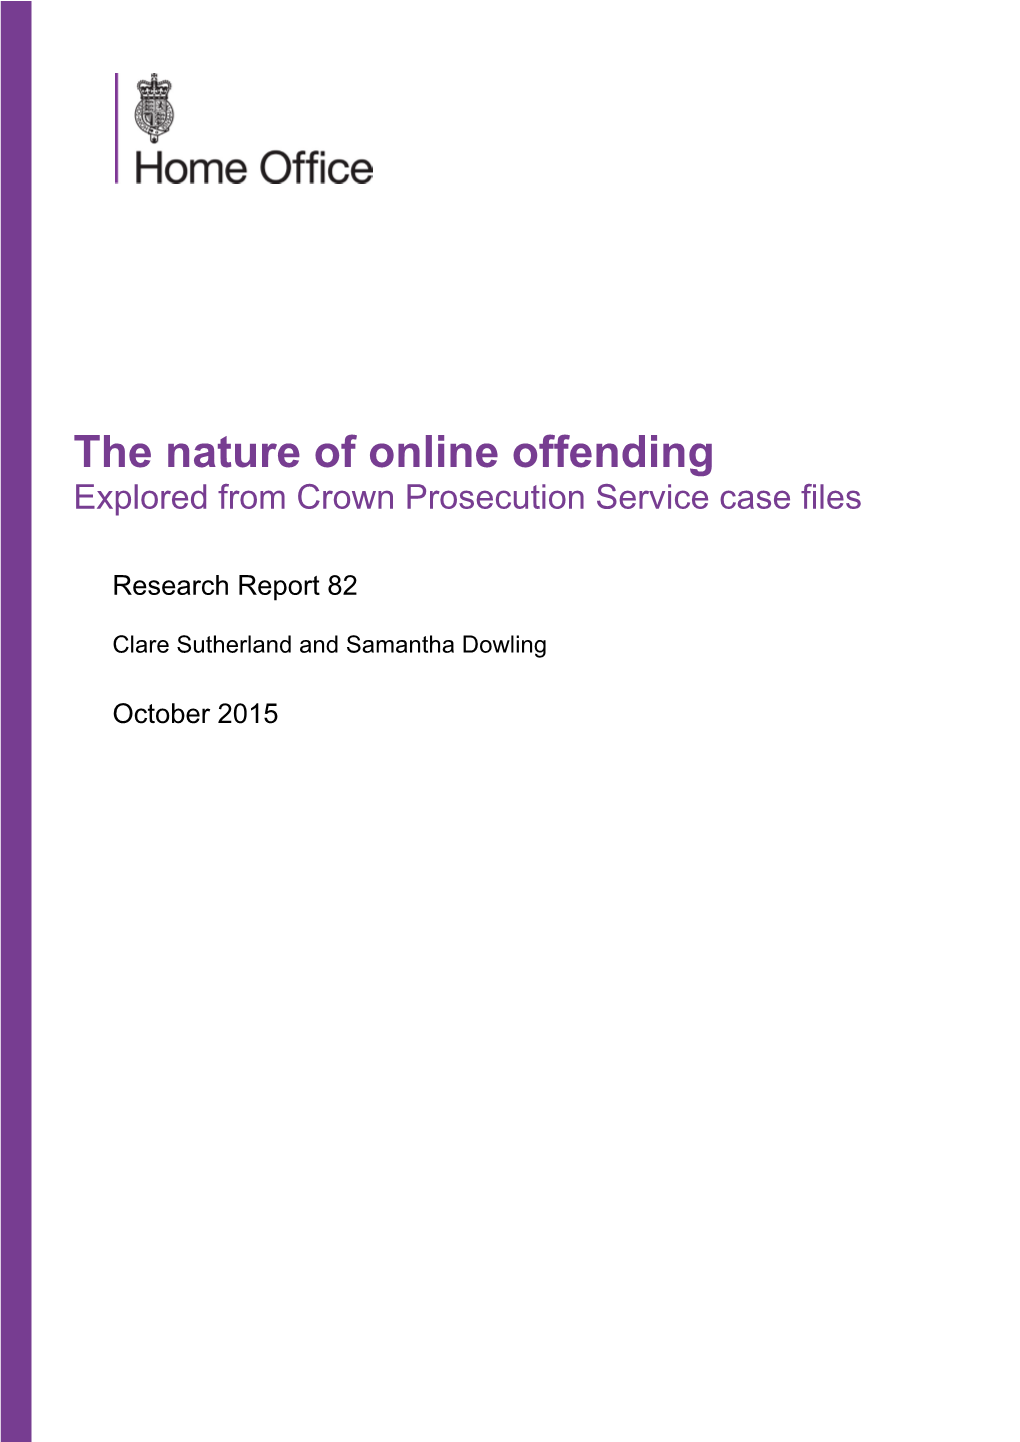 The Nature of Online Offending Explored from Crown Prosecution Service Case Files